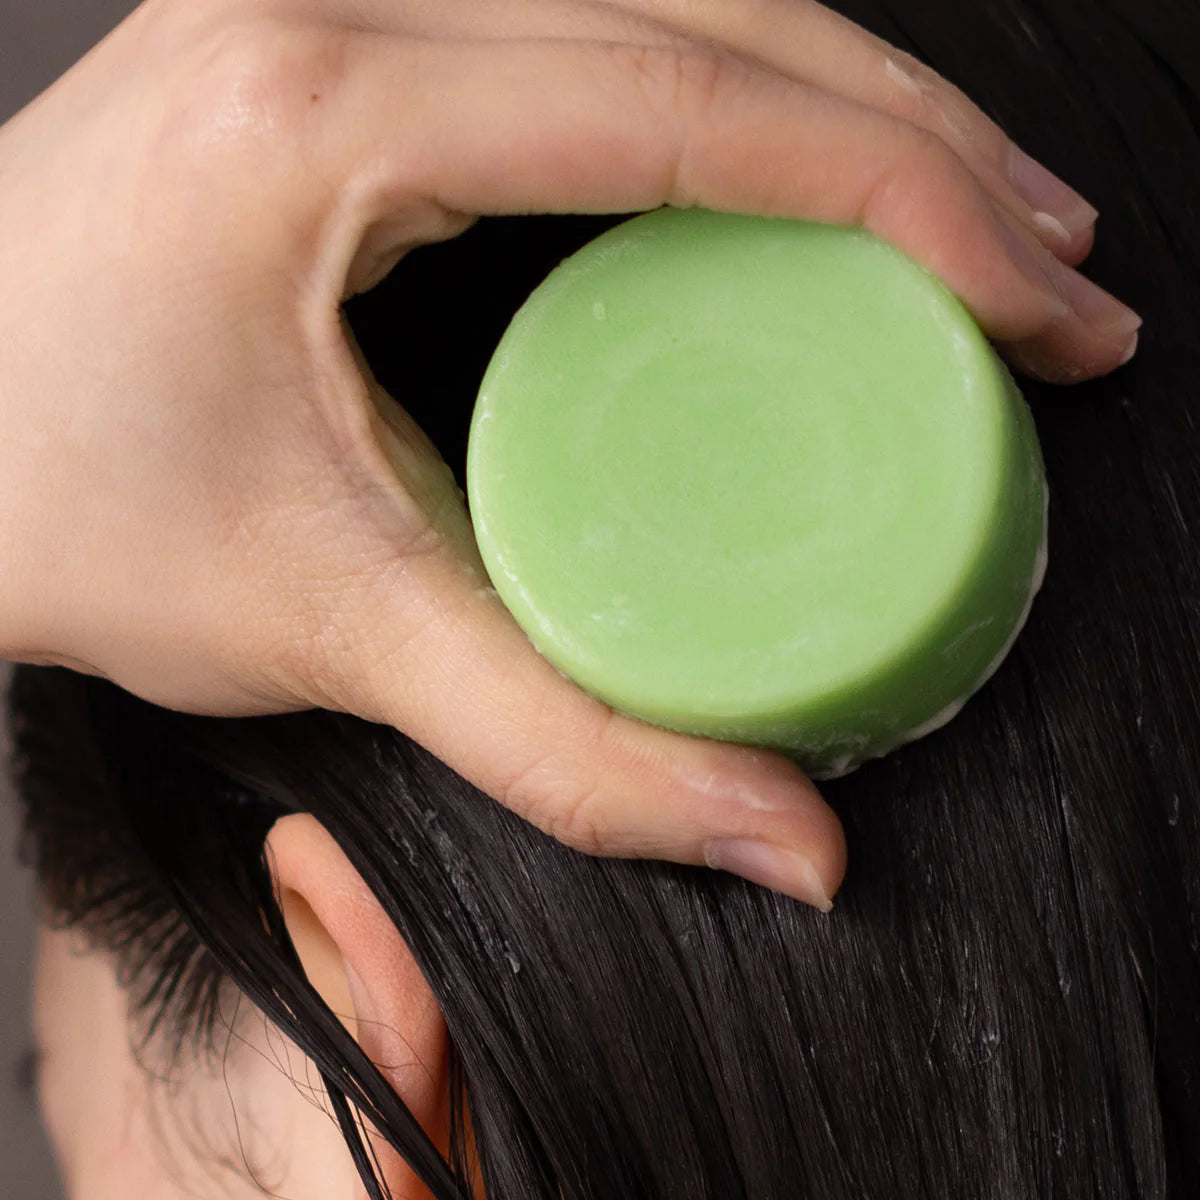 Ethique Nourishing Conditioner Bar for Dry Hair: The Guardian